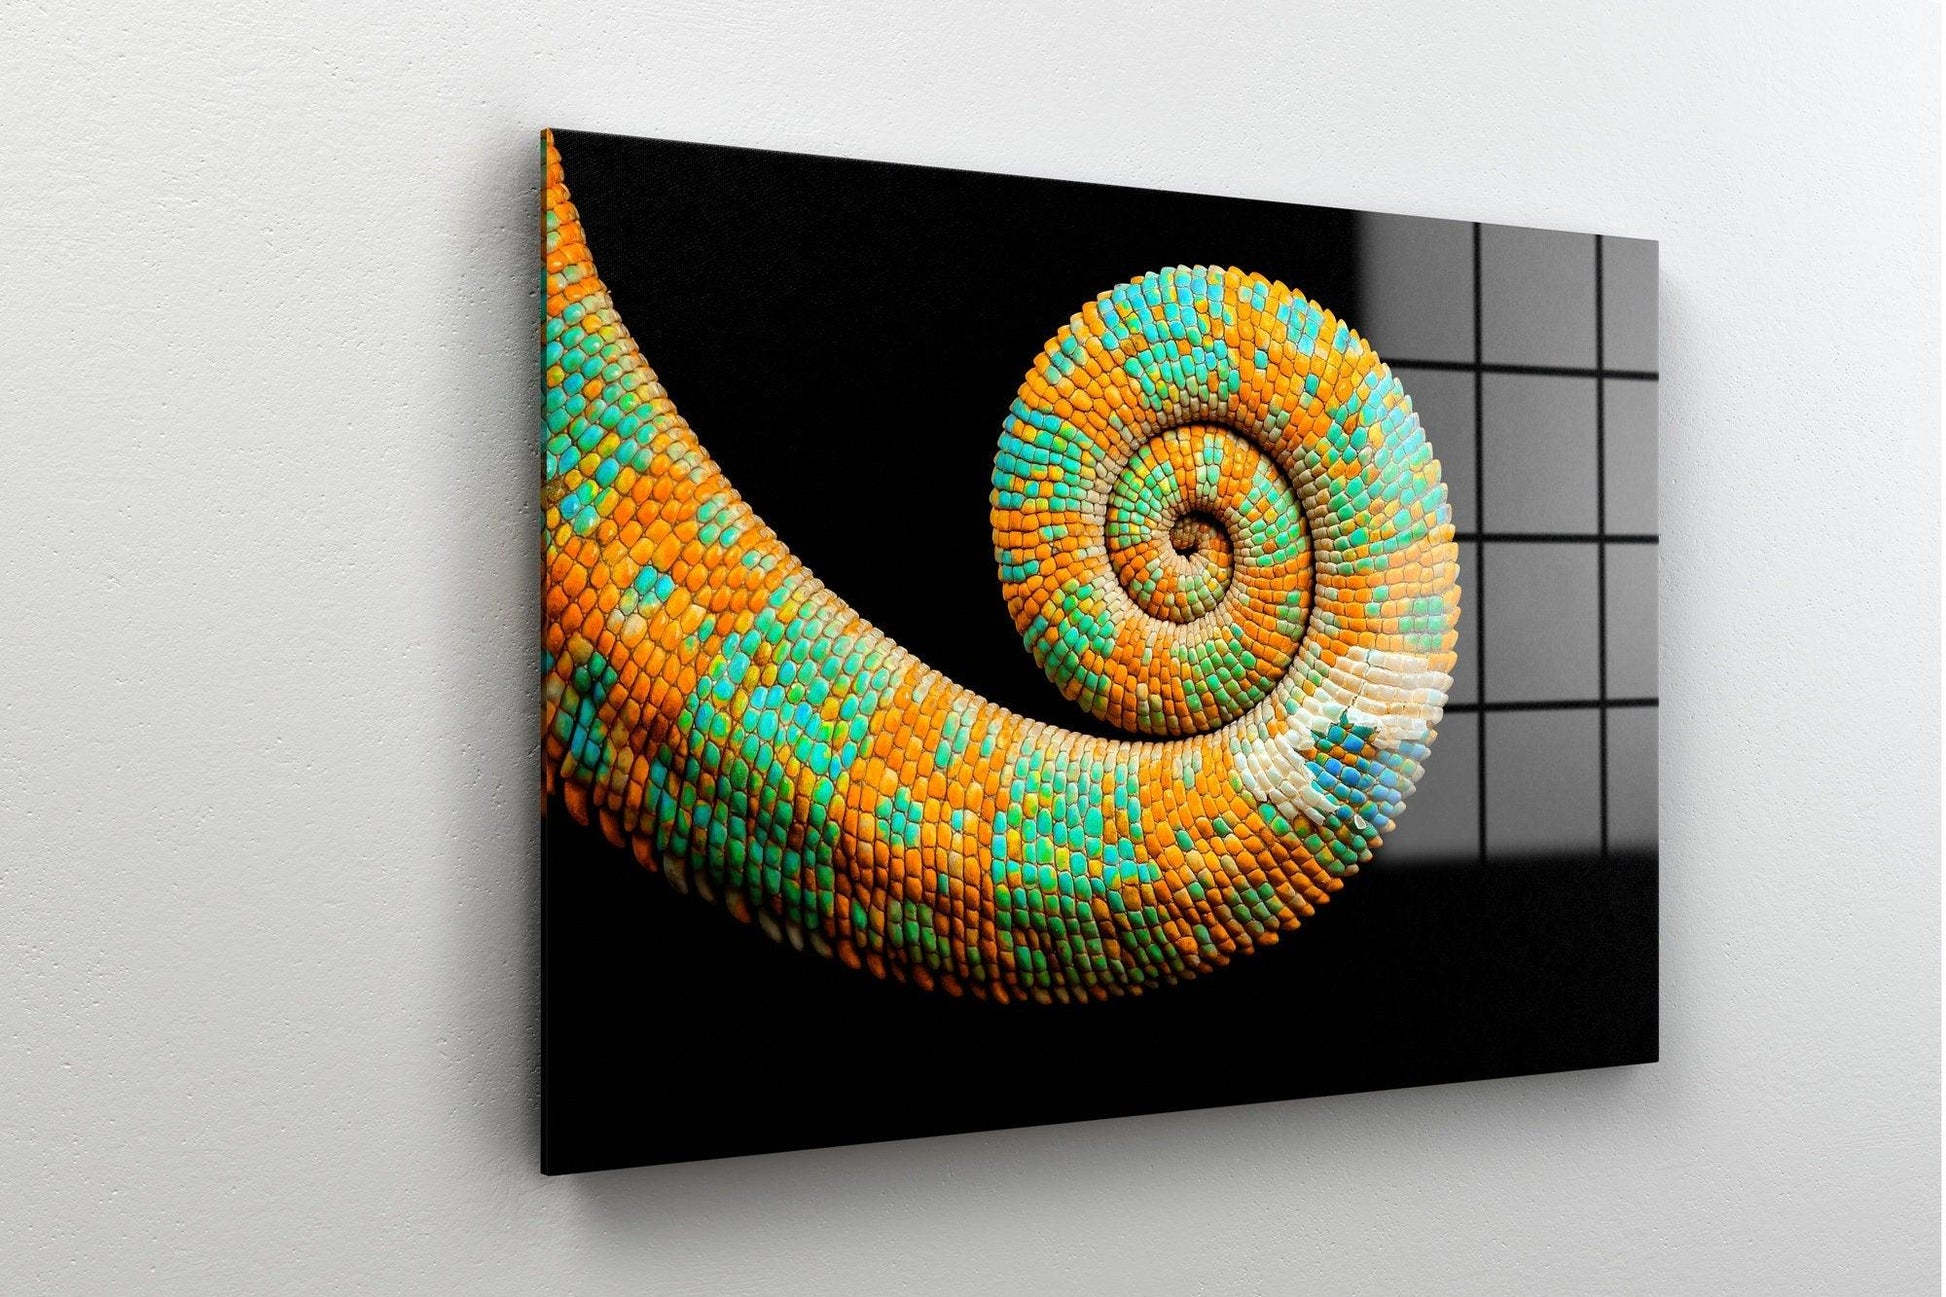 Snakes on Large Home Artwork Poisonous Snake Cool Art Wall Wild Vipers Printing Art On Canvas Wildlife Pictures Art Decor, Snake Wall Art - TrendiArt